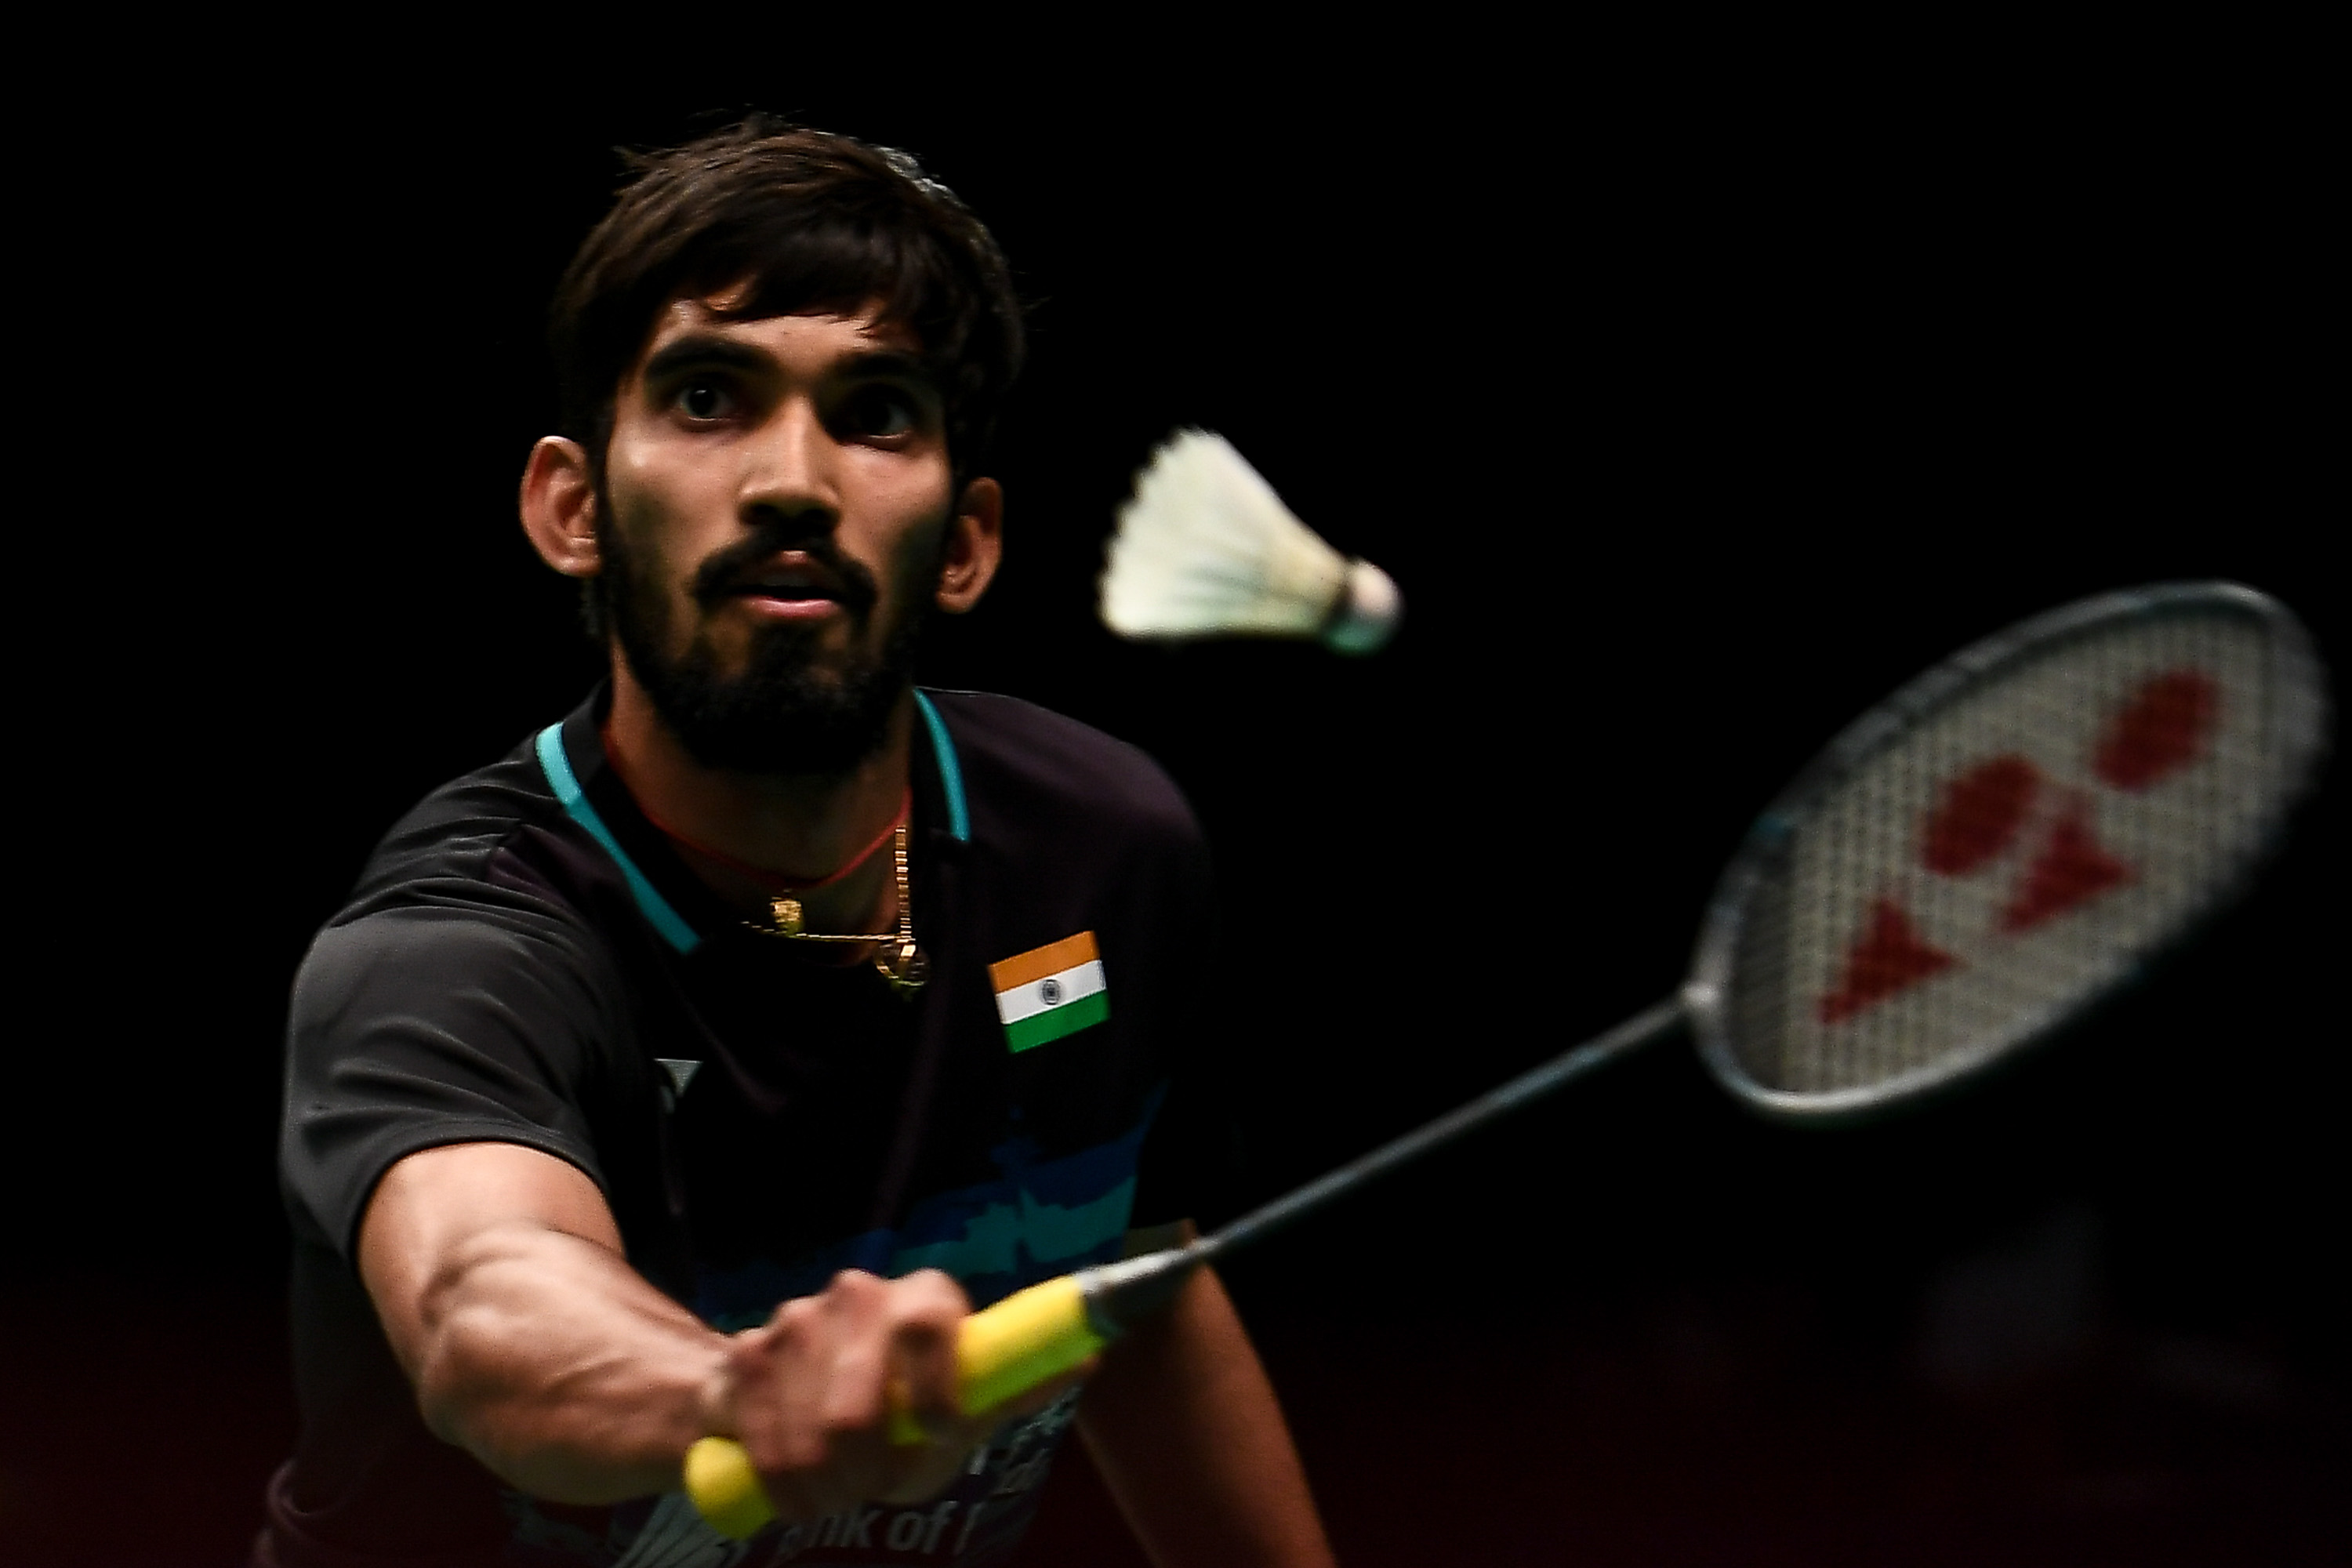 Kidambi Srikanth and HS Prannoy need to be able to cope up with pressure, believes Vimal Kumar